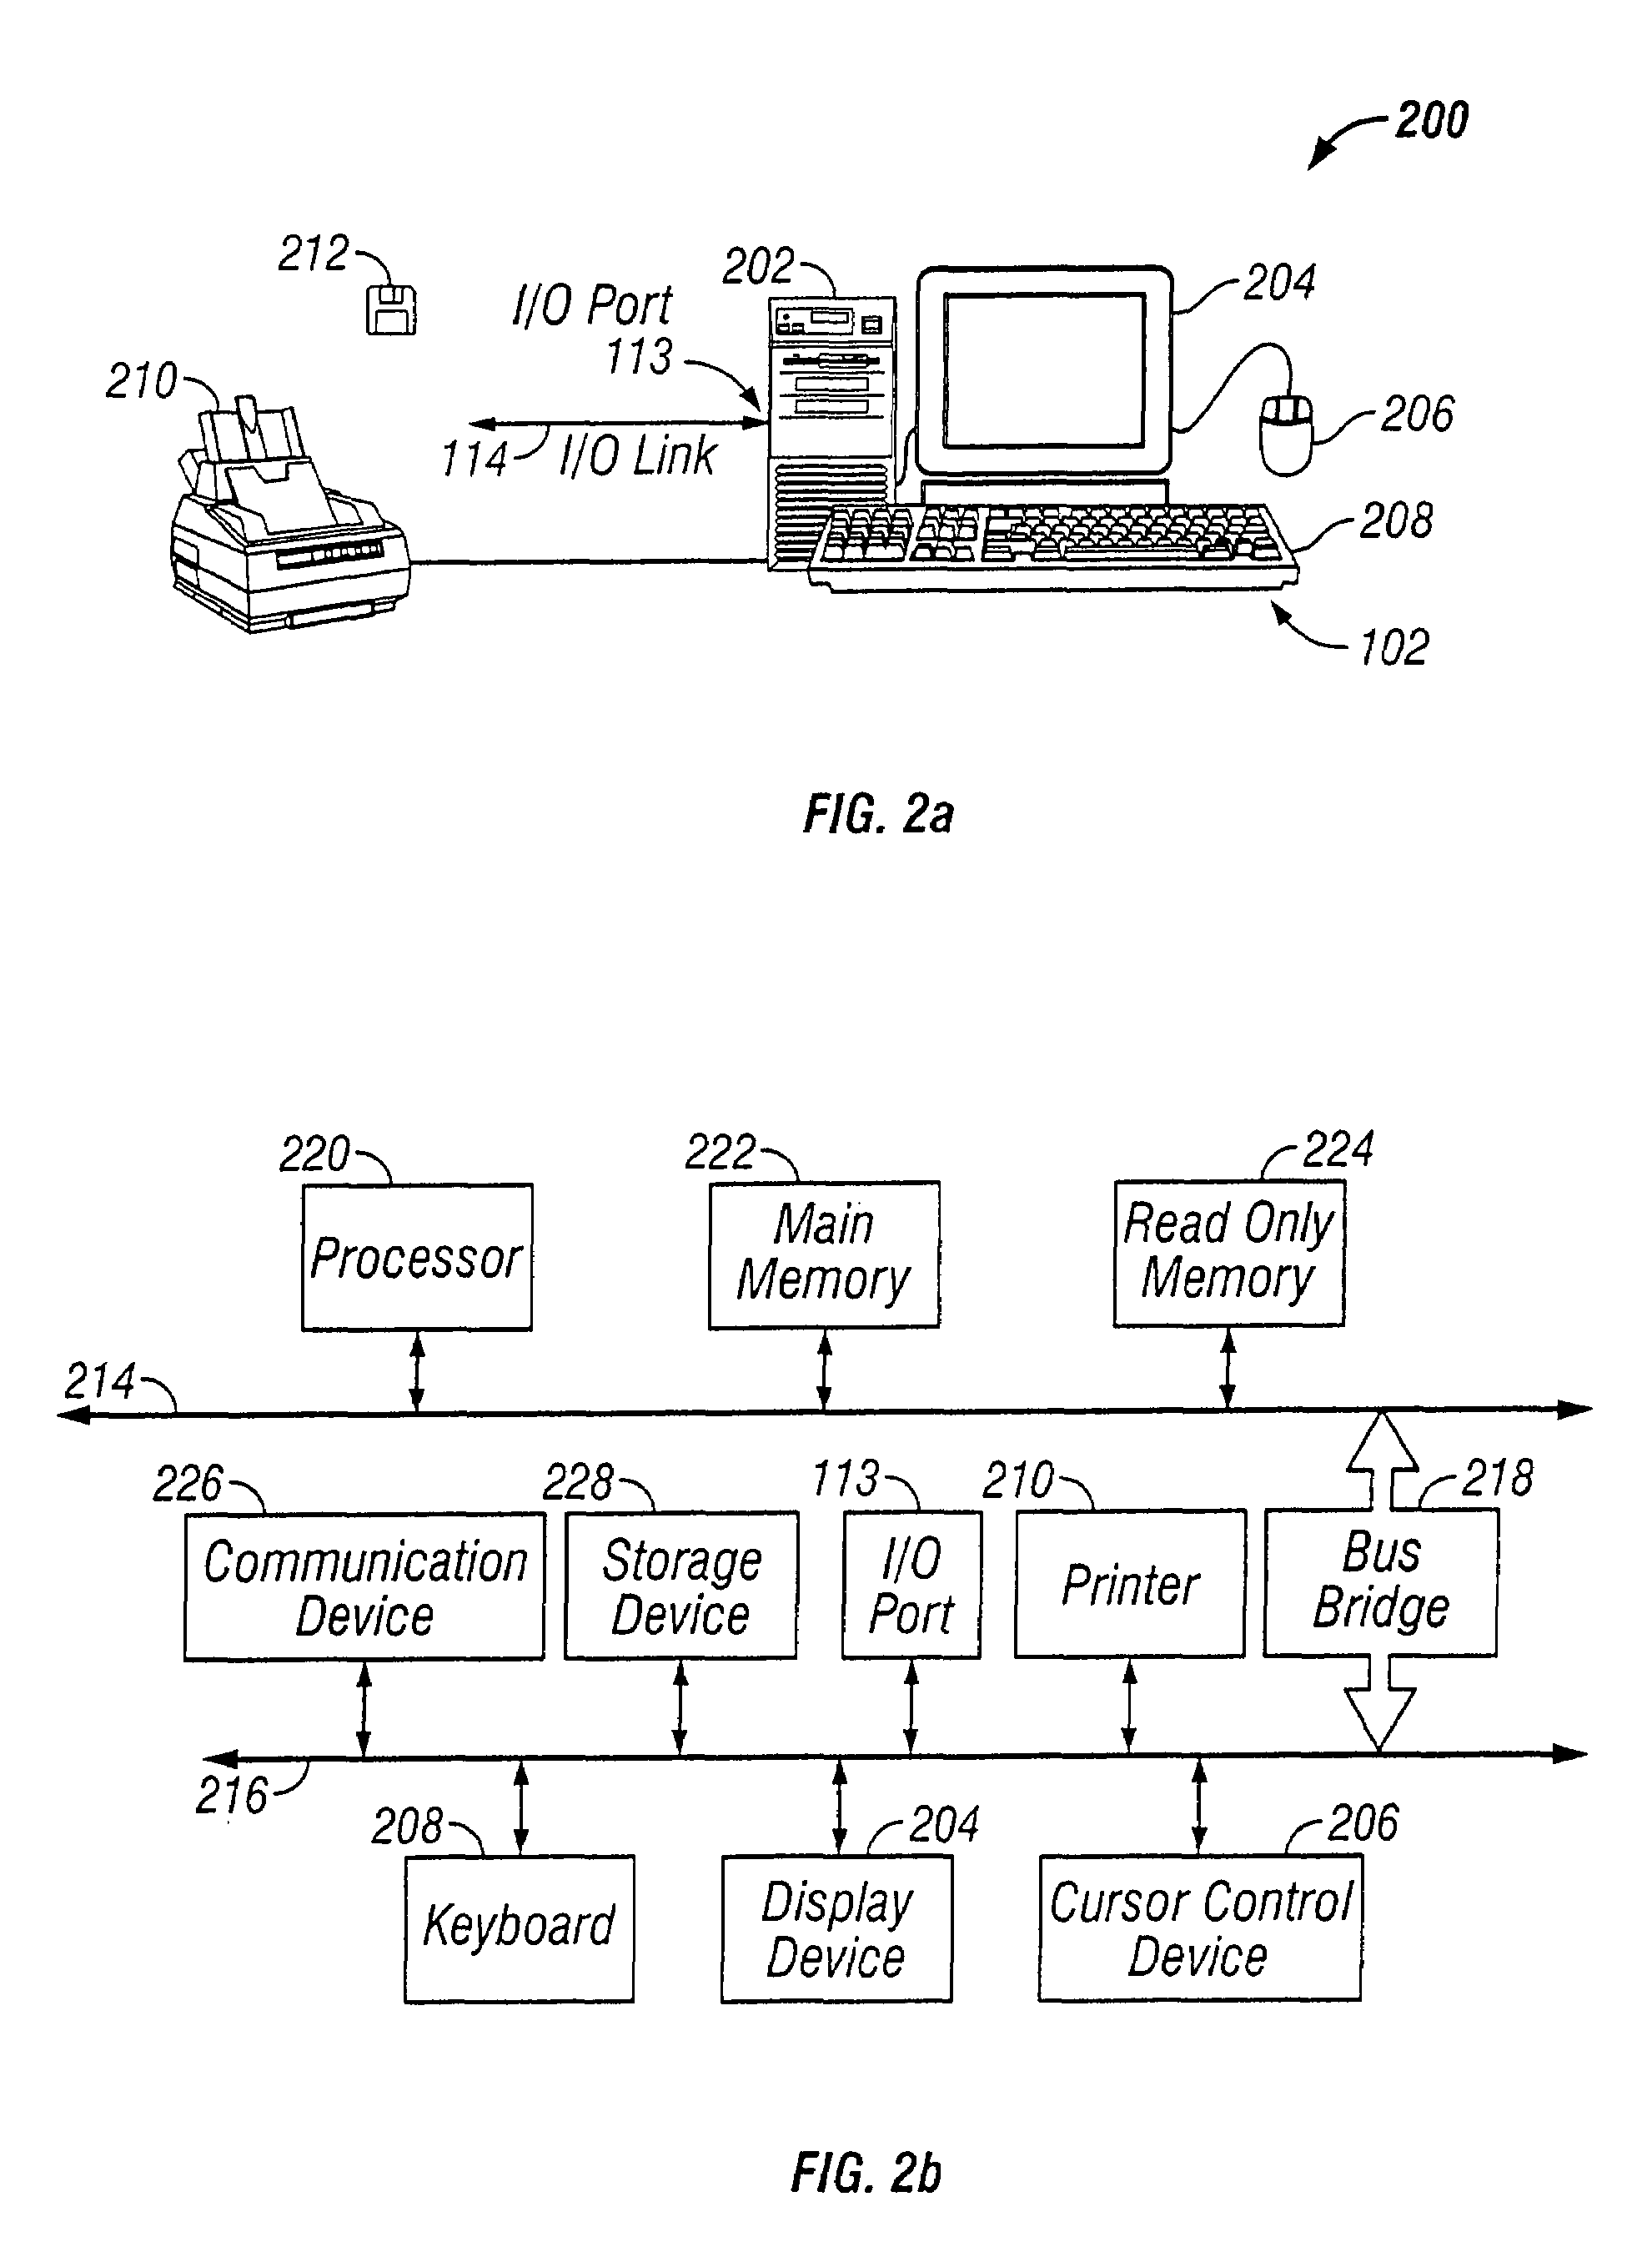 Computing device to allow for the selection and display of a multimedia presentation of an audio file and to allow a user to play a musical instrument in conjunction with the multimedia presentation